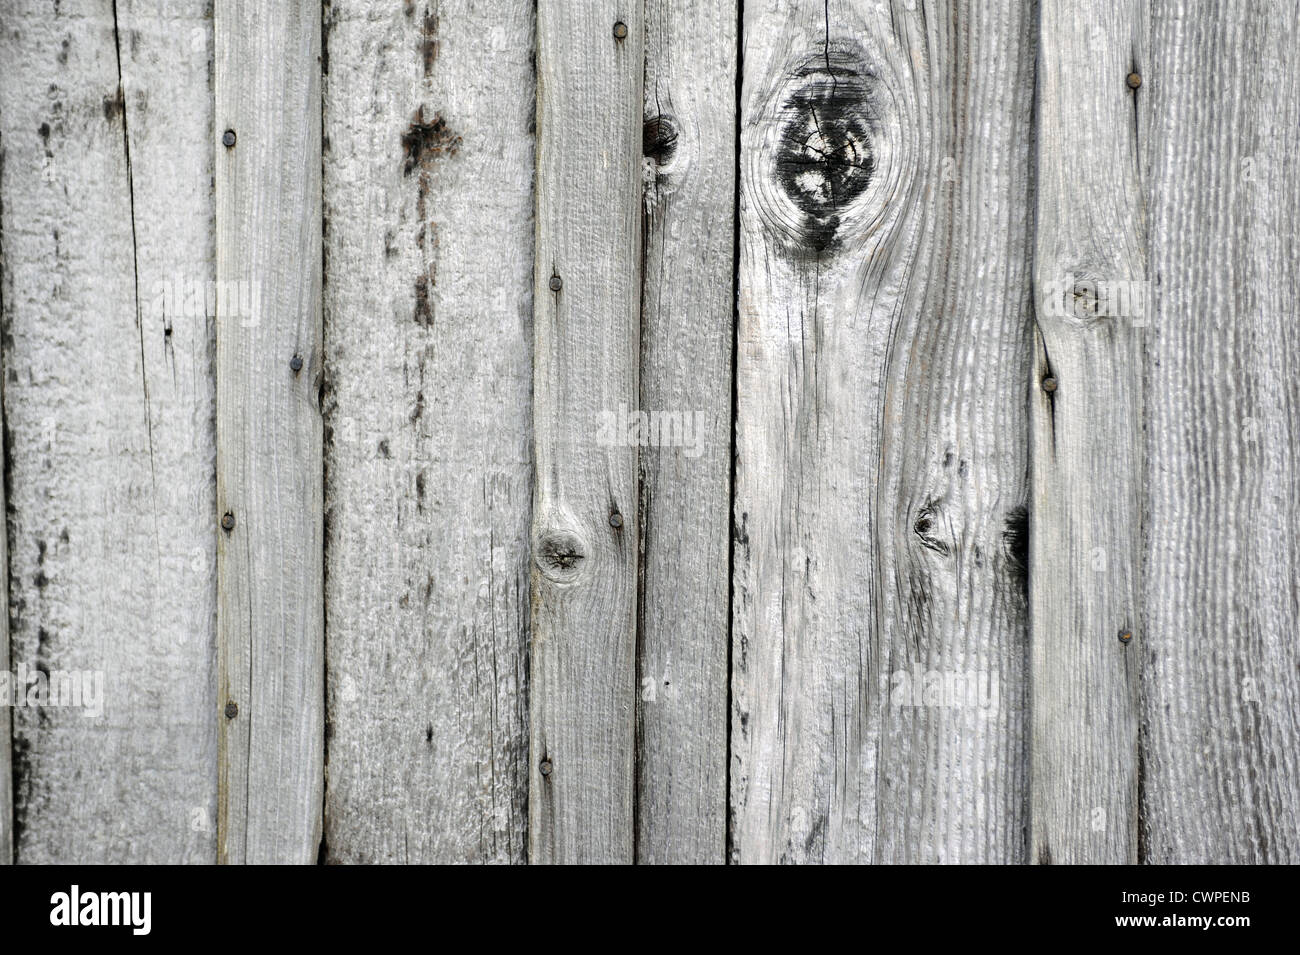 Old weatherbeaten wood with nails and knots Stock Photo